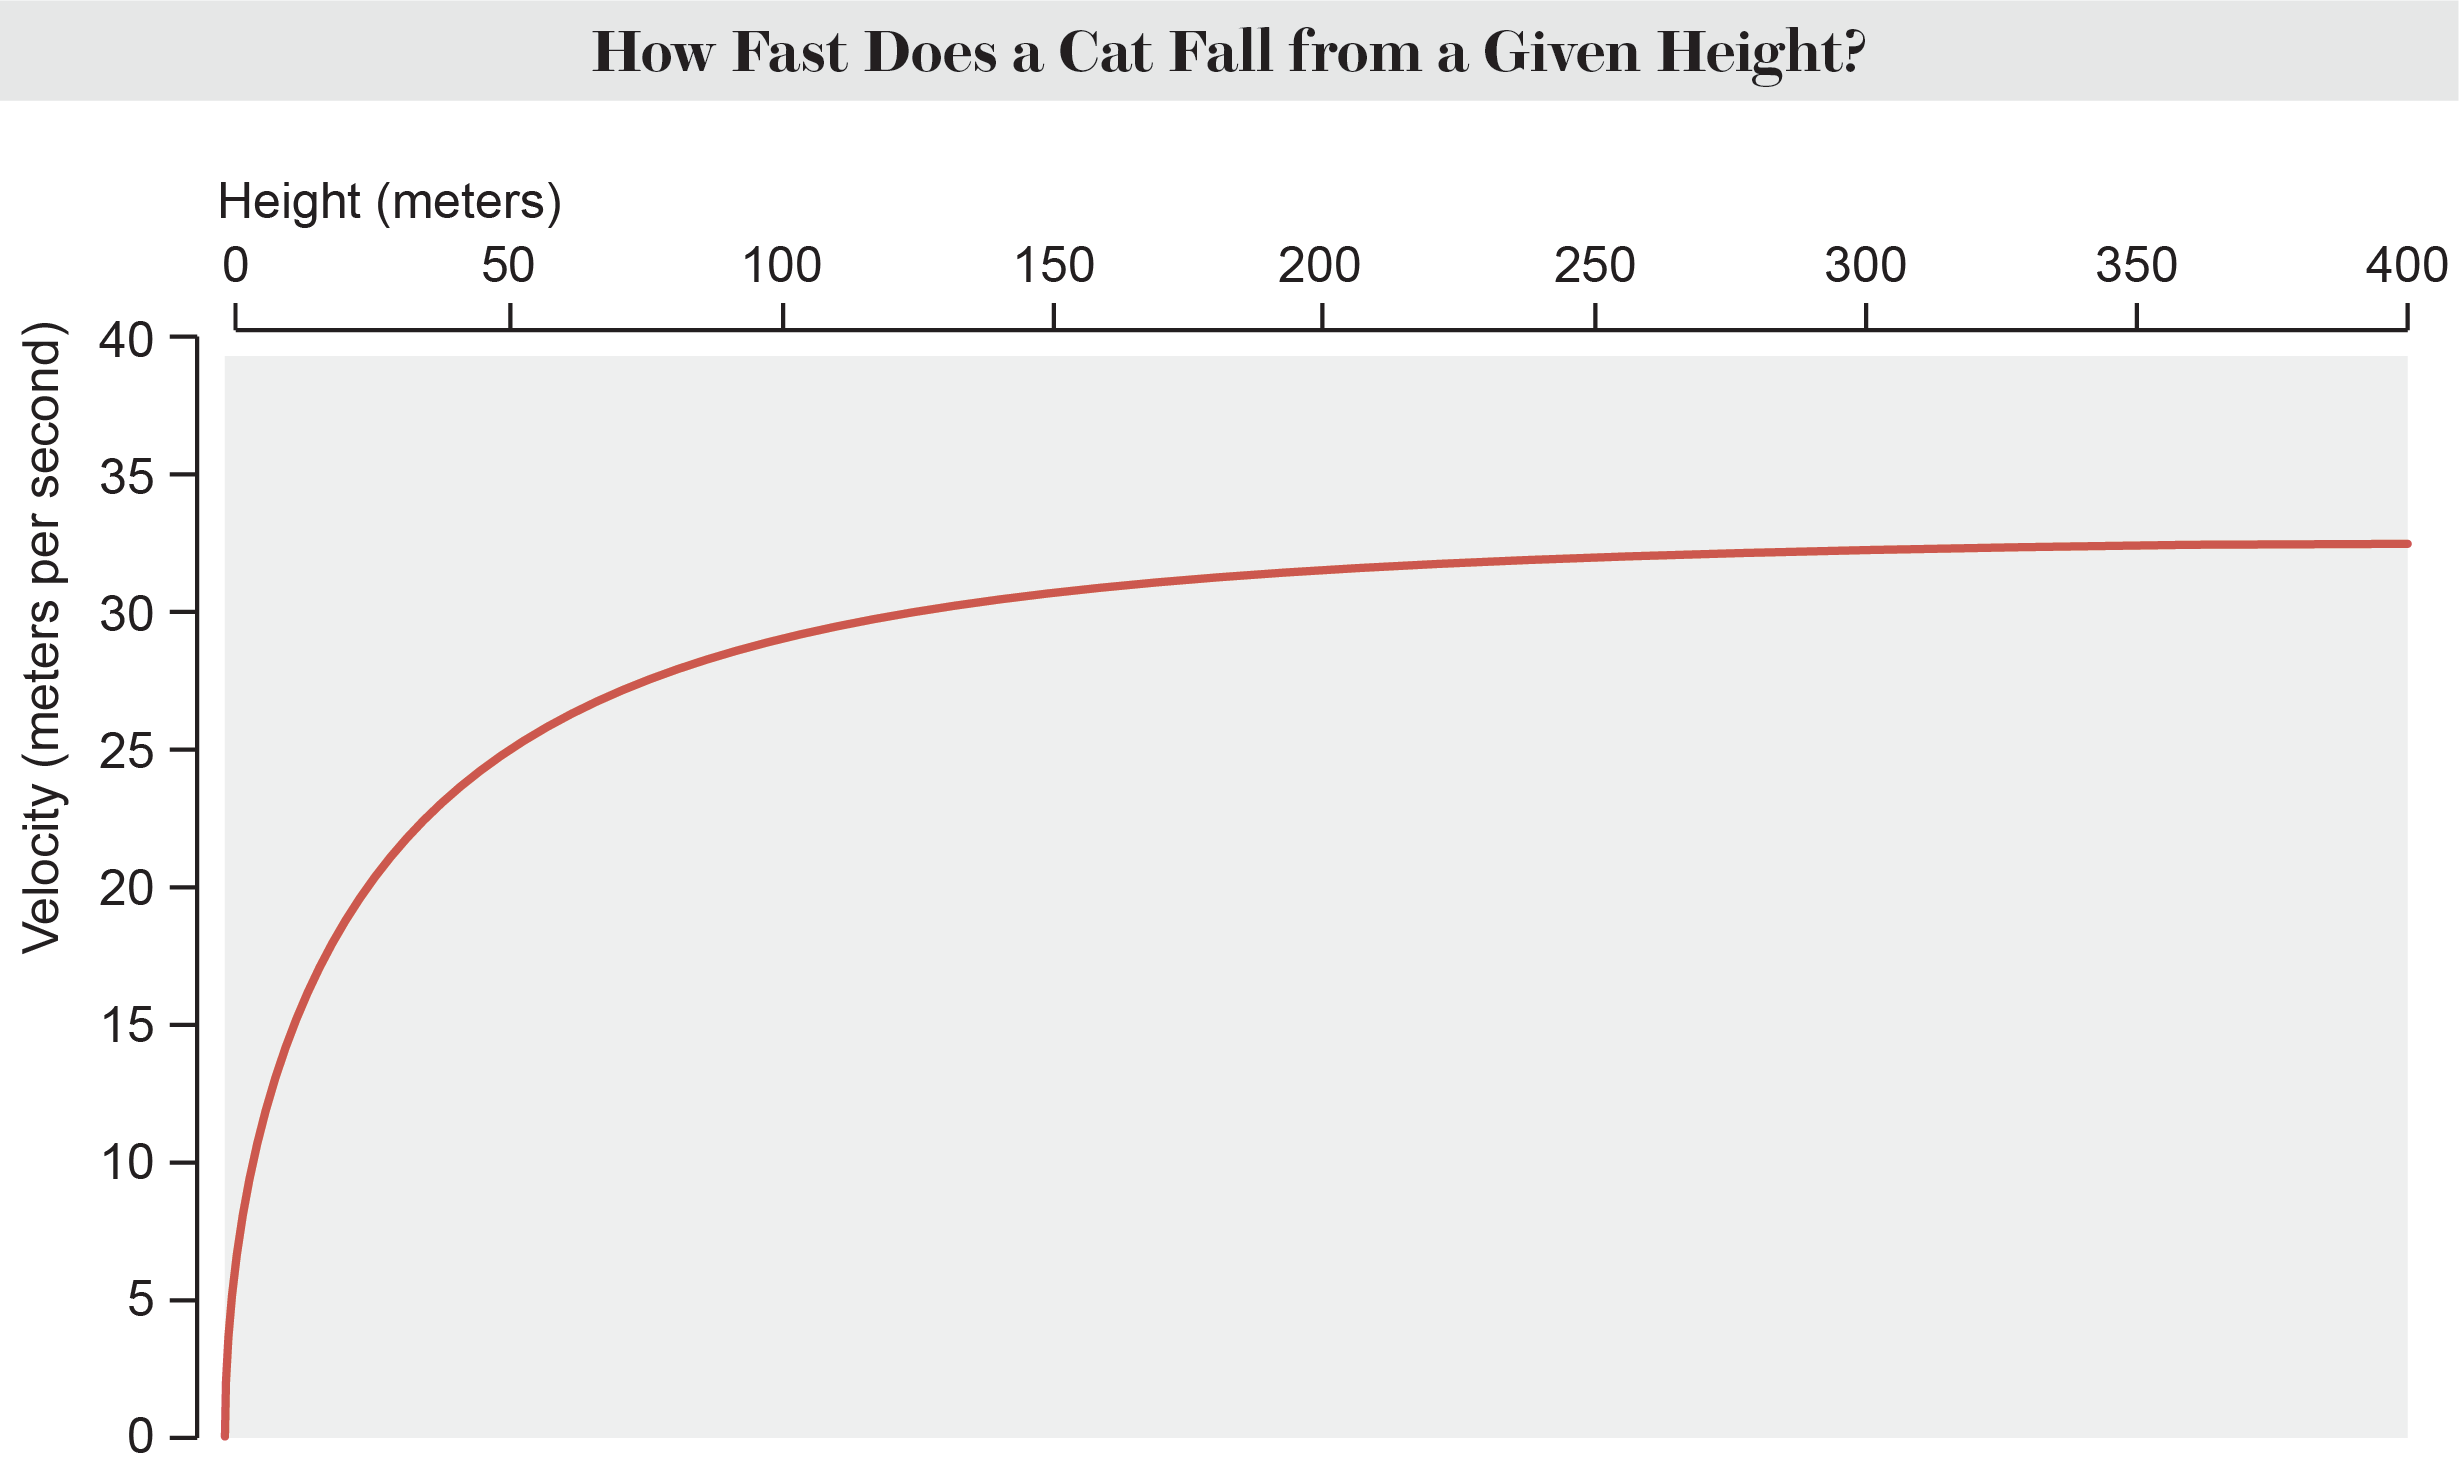 Figure showing the height at which a cat reaches its terminal velocity.